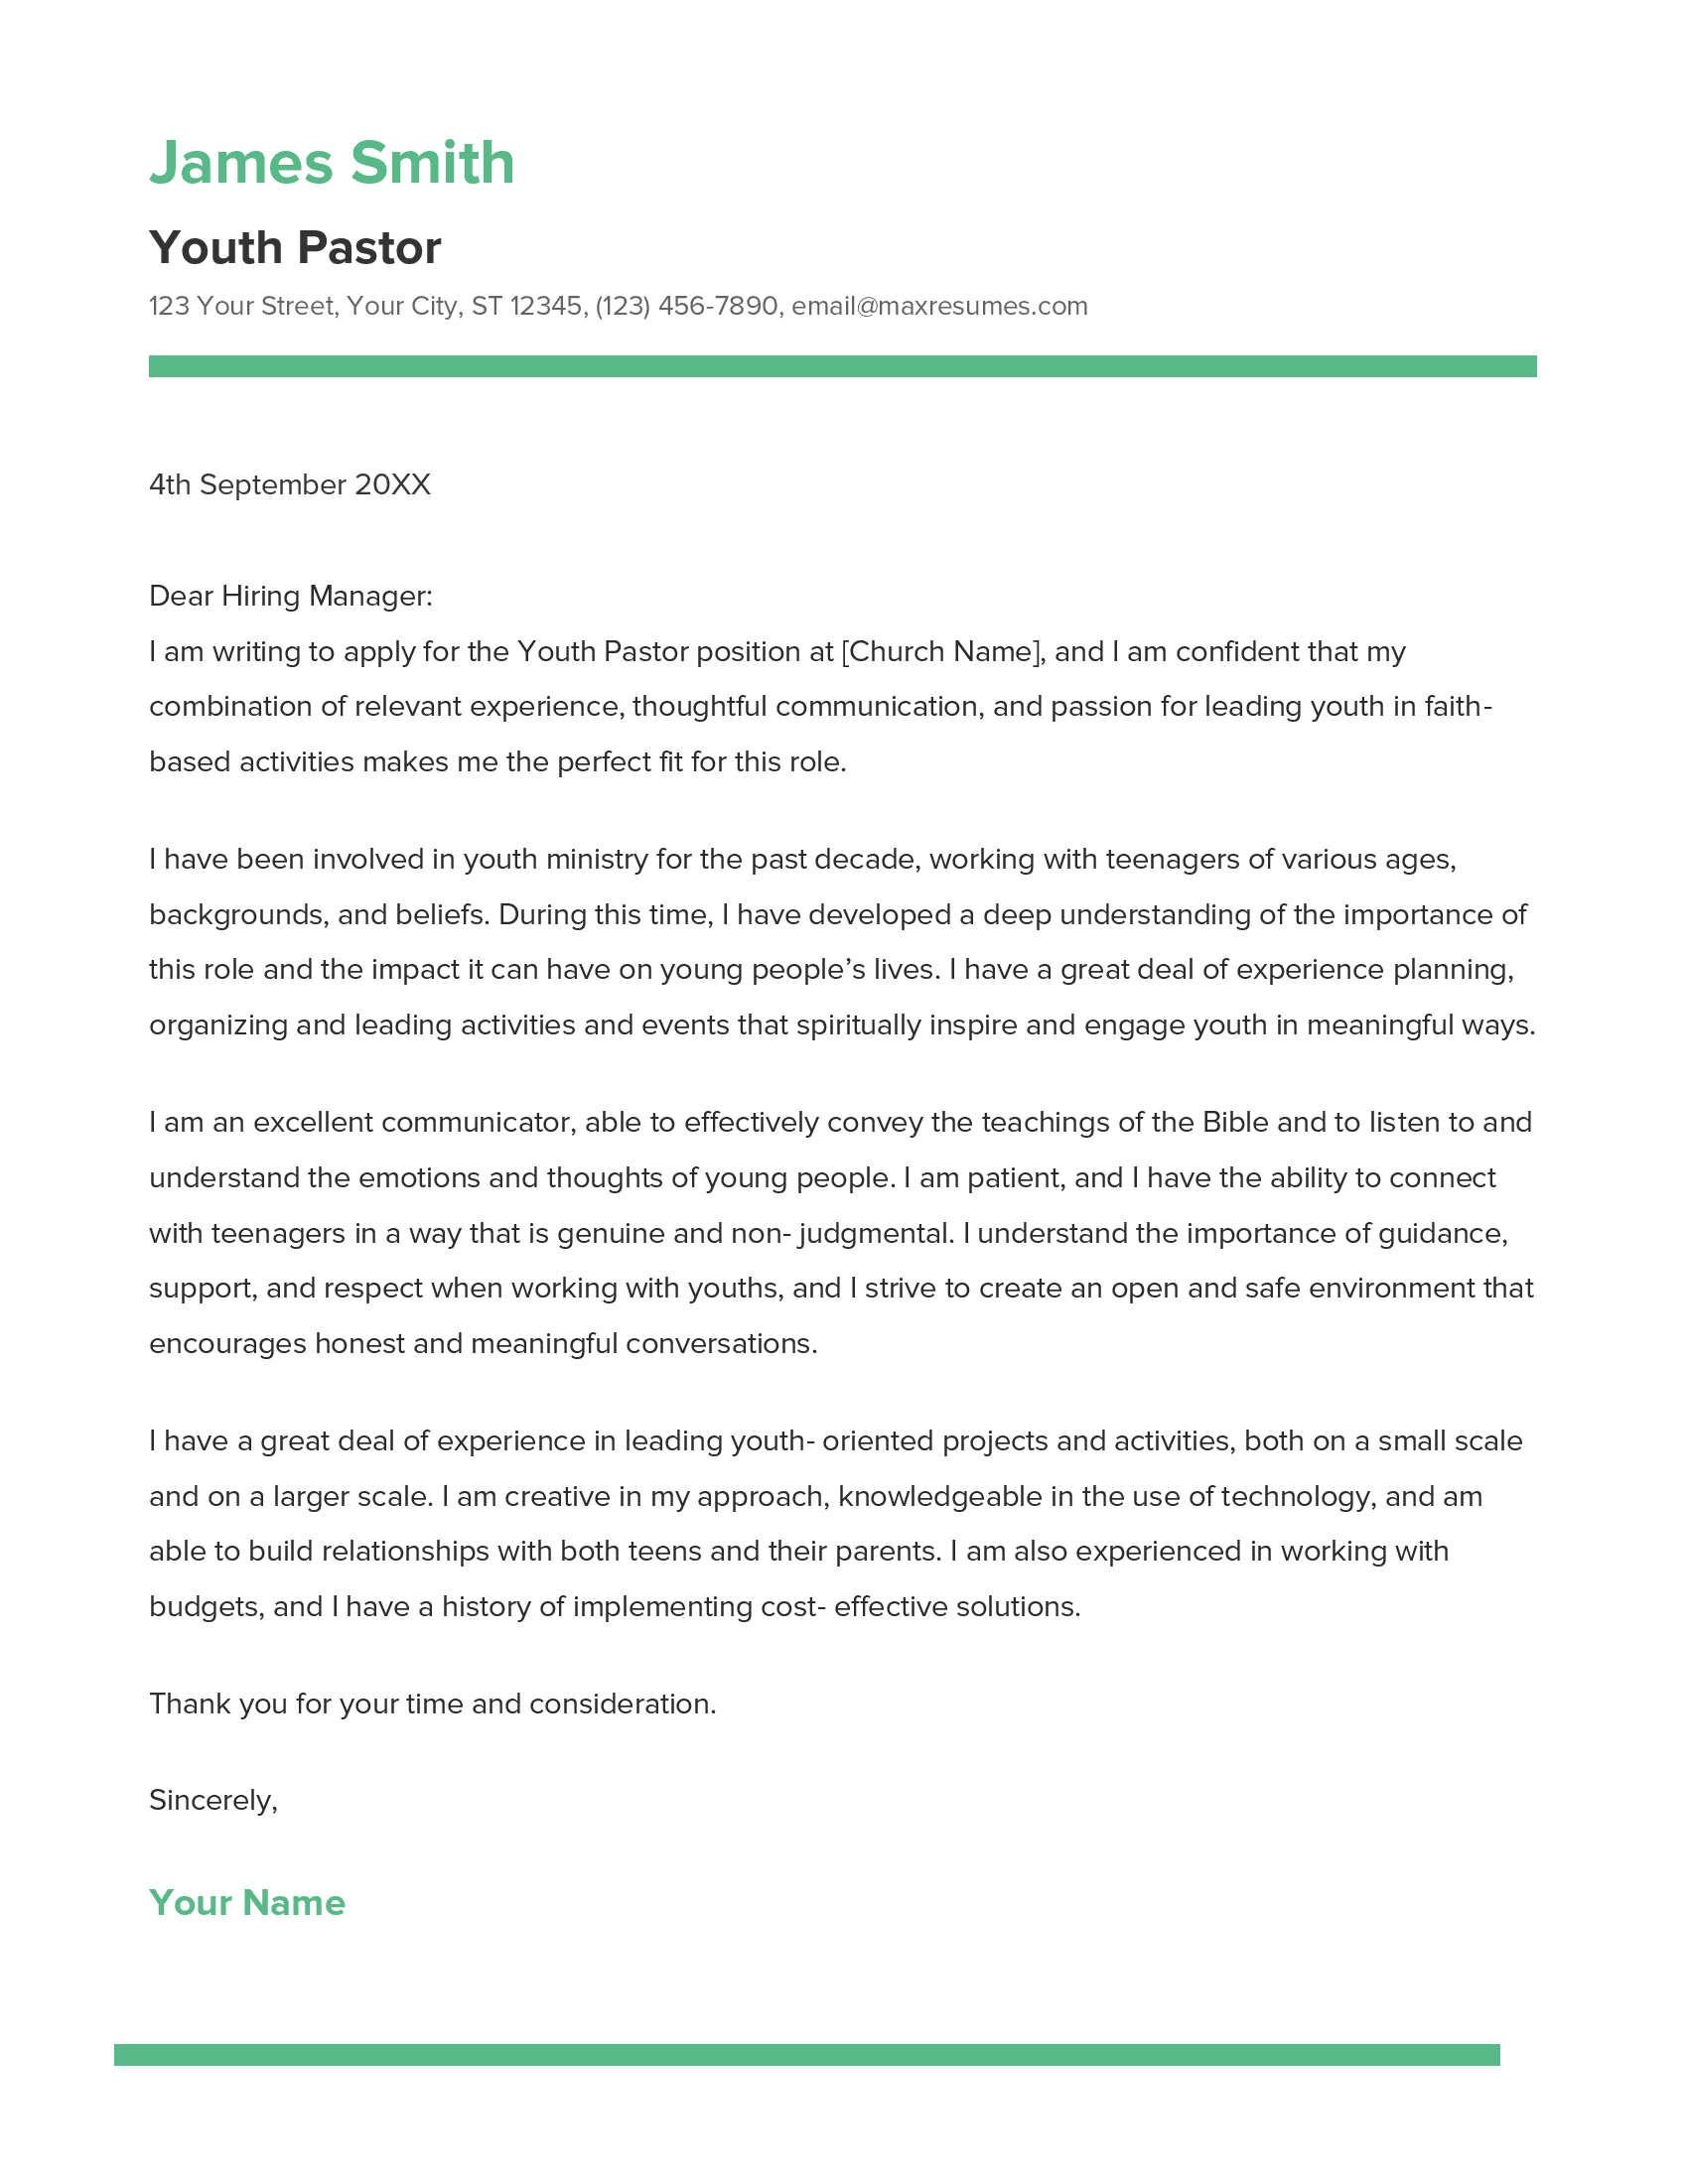 Youth Pastor Cover Letter Example